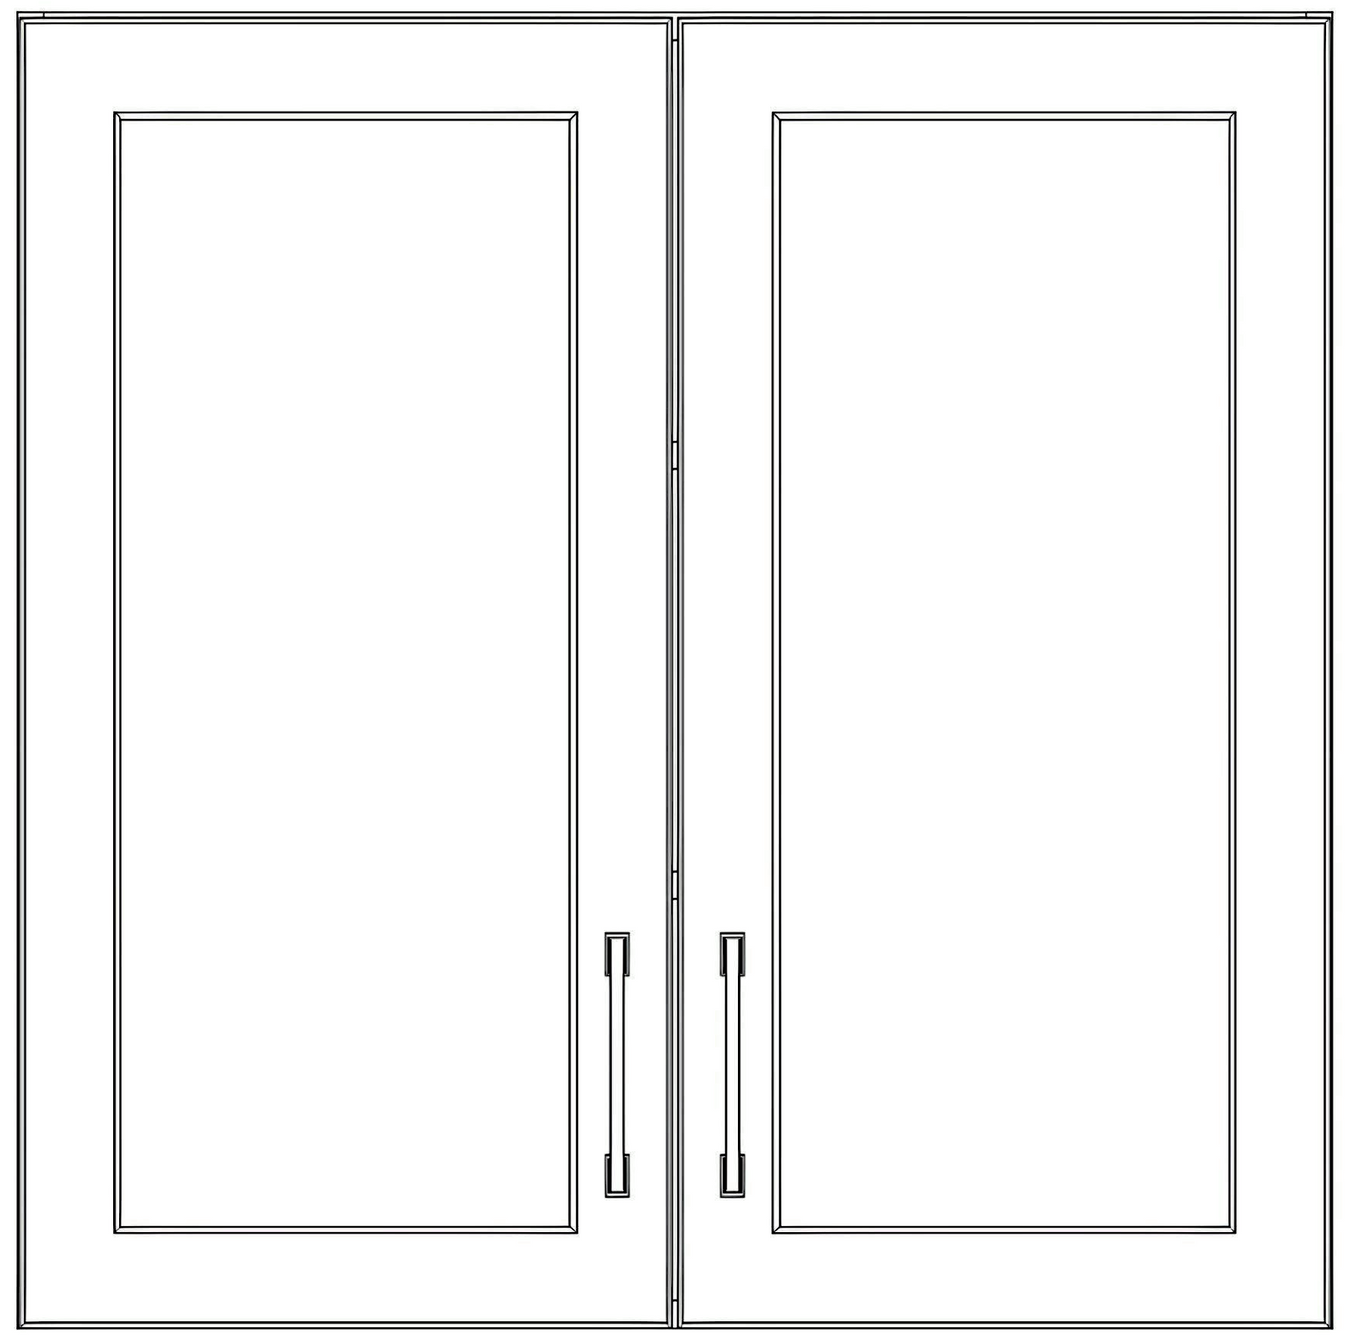 30" High Wall Cabinets - Painted Doors